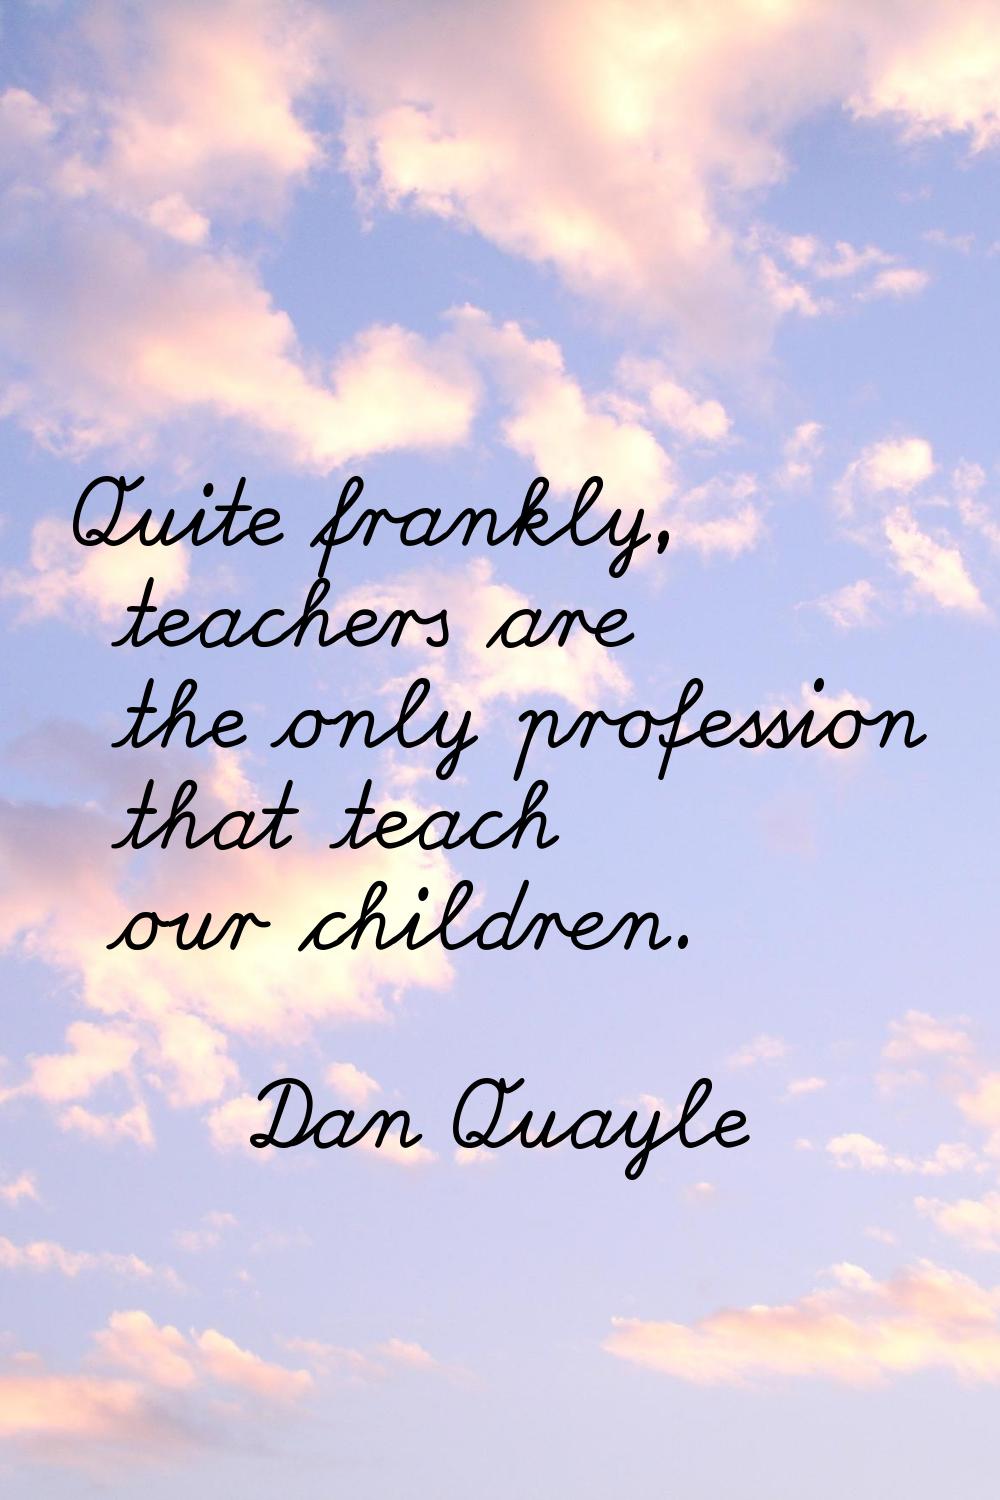 Quite frankly, teachers are the only profession that teach our children.